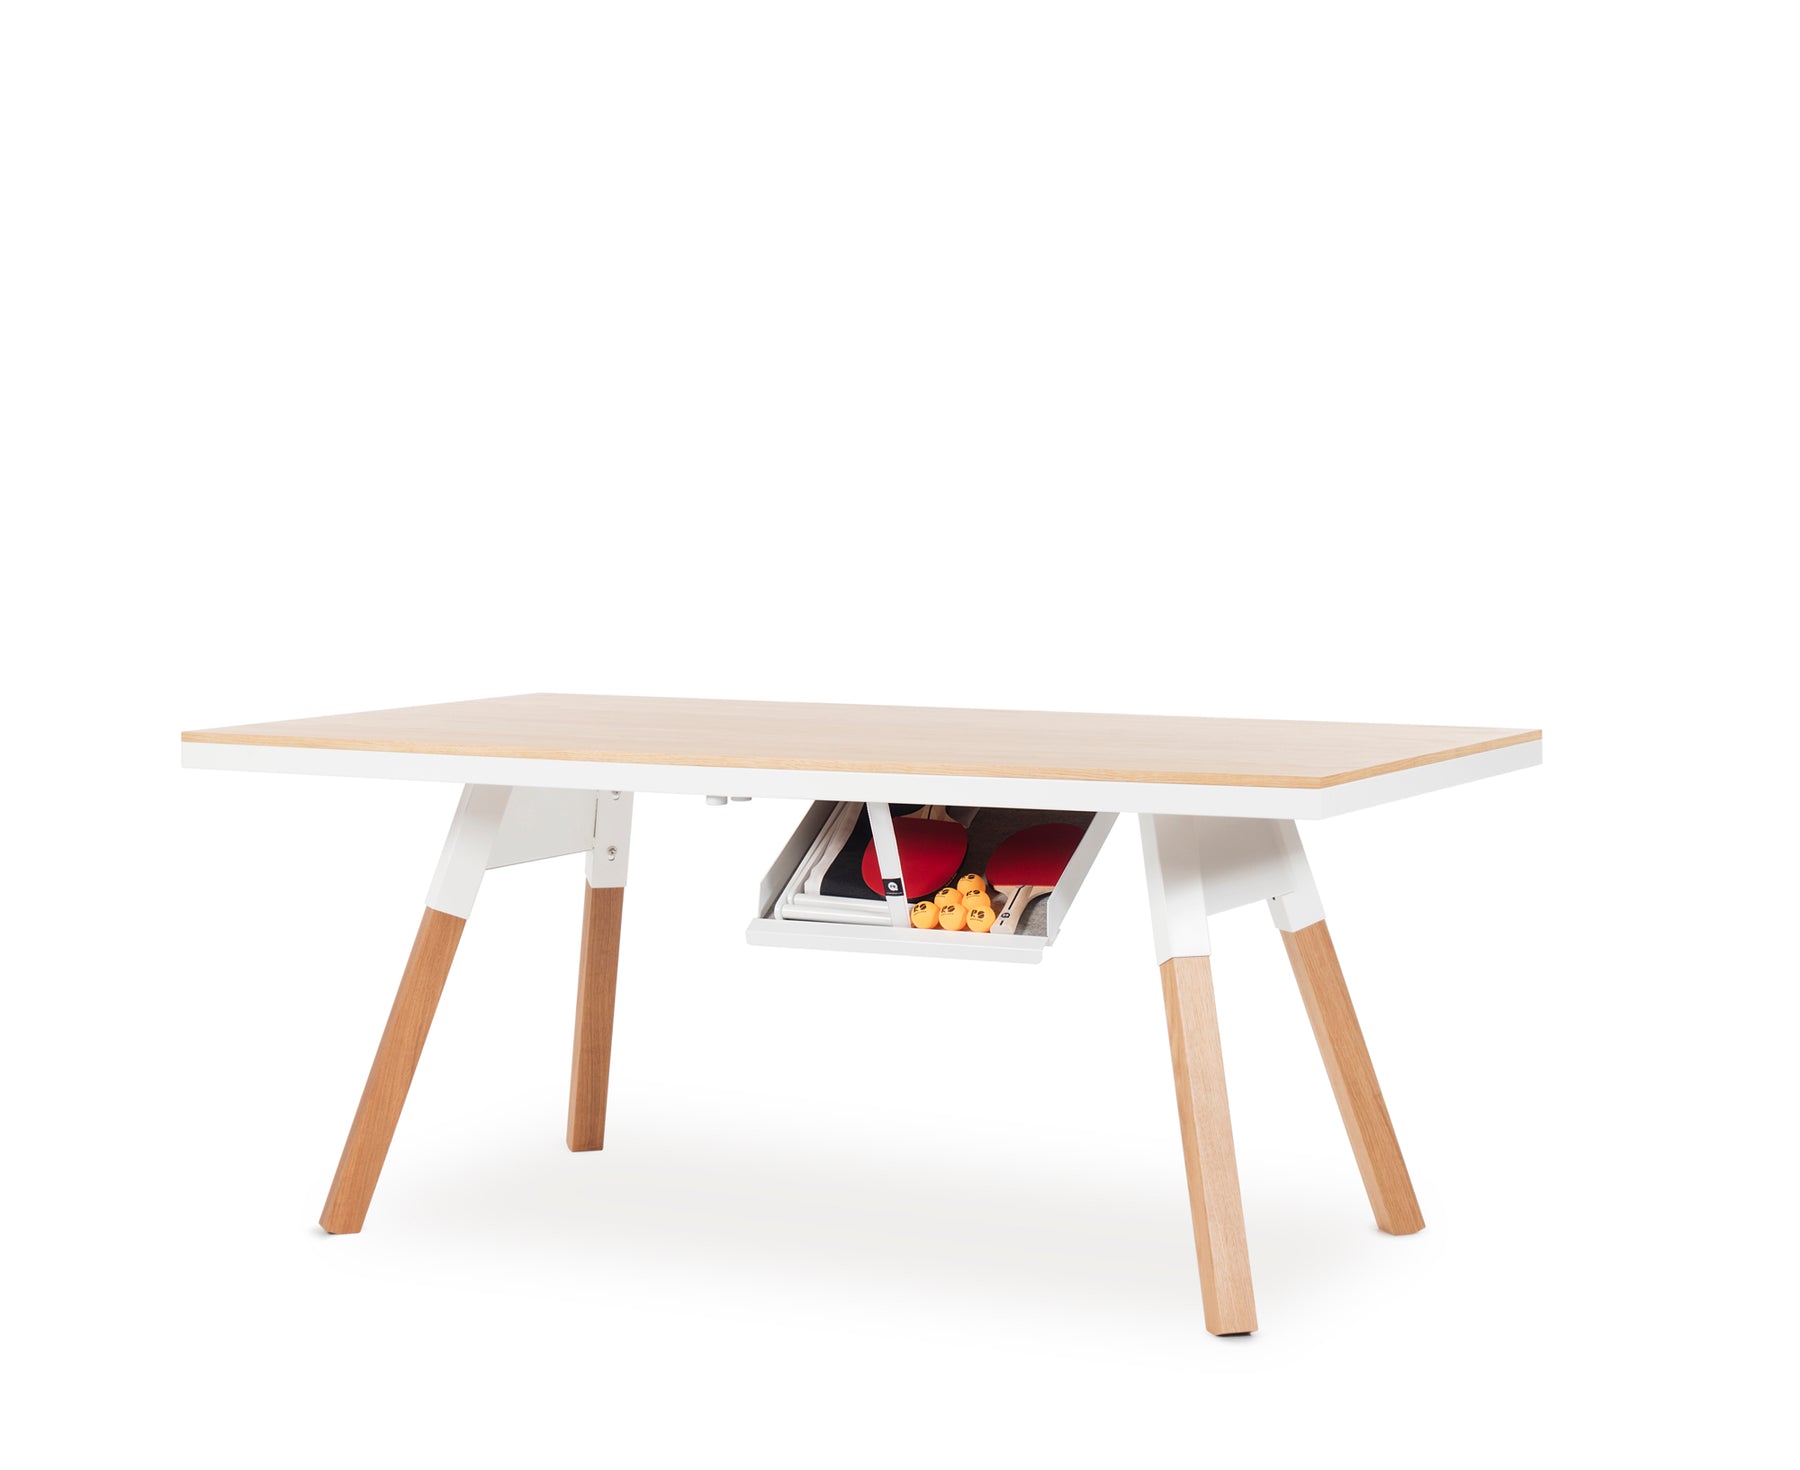 Ping Pong Table Desk | DSHOP